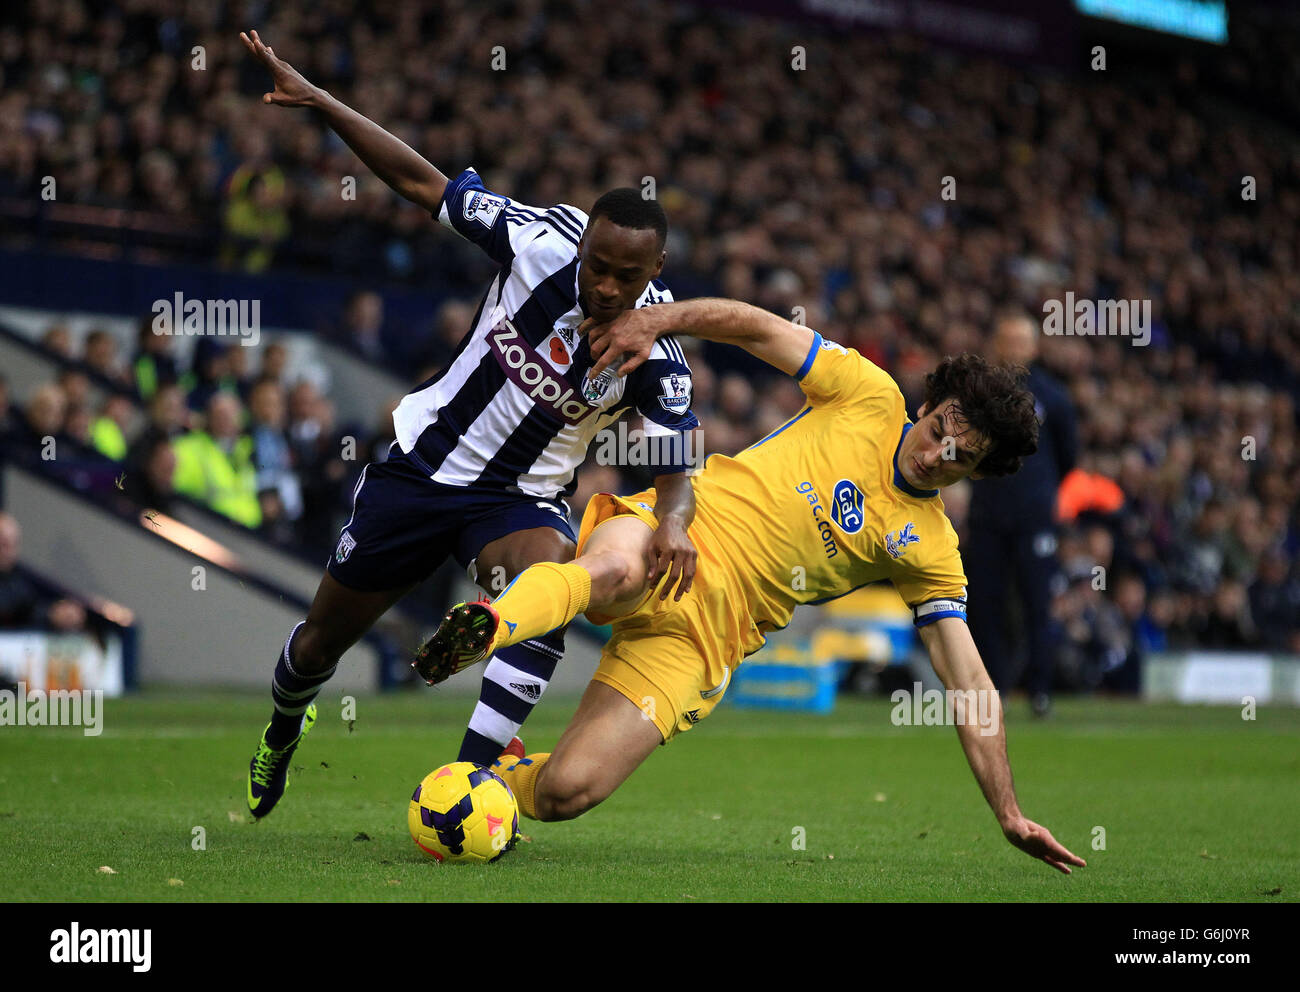 West Bromwich Albion's Saido Berahino rides the tackle from Crystal Palace's Mike Jedinak (right) during the Barclays Premier League match at the Hawthorns, West Bromwich. Stock Photo